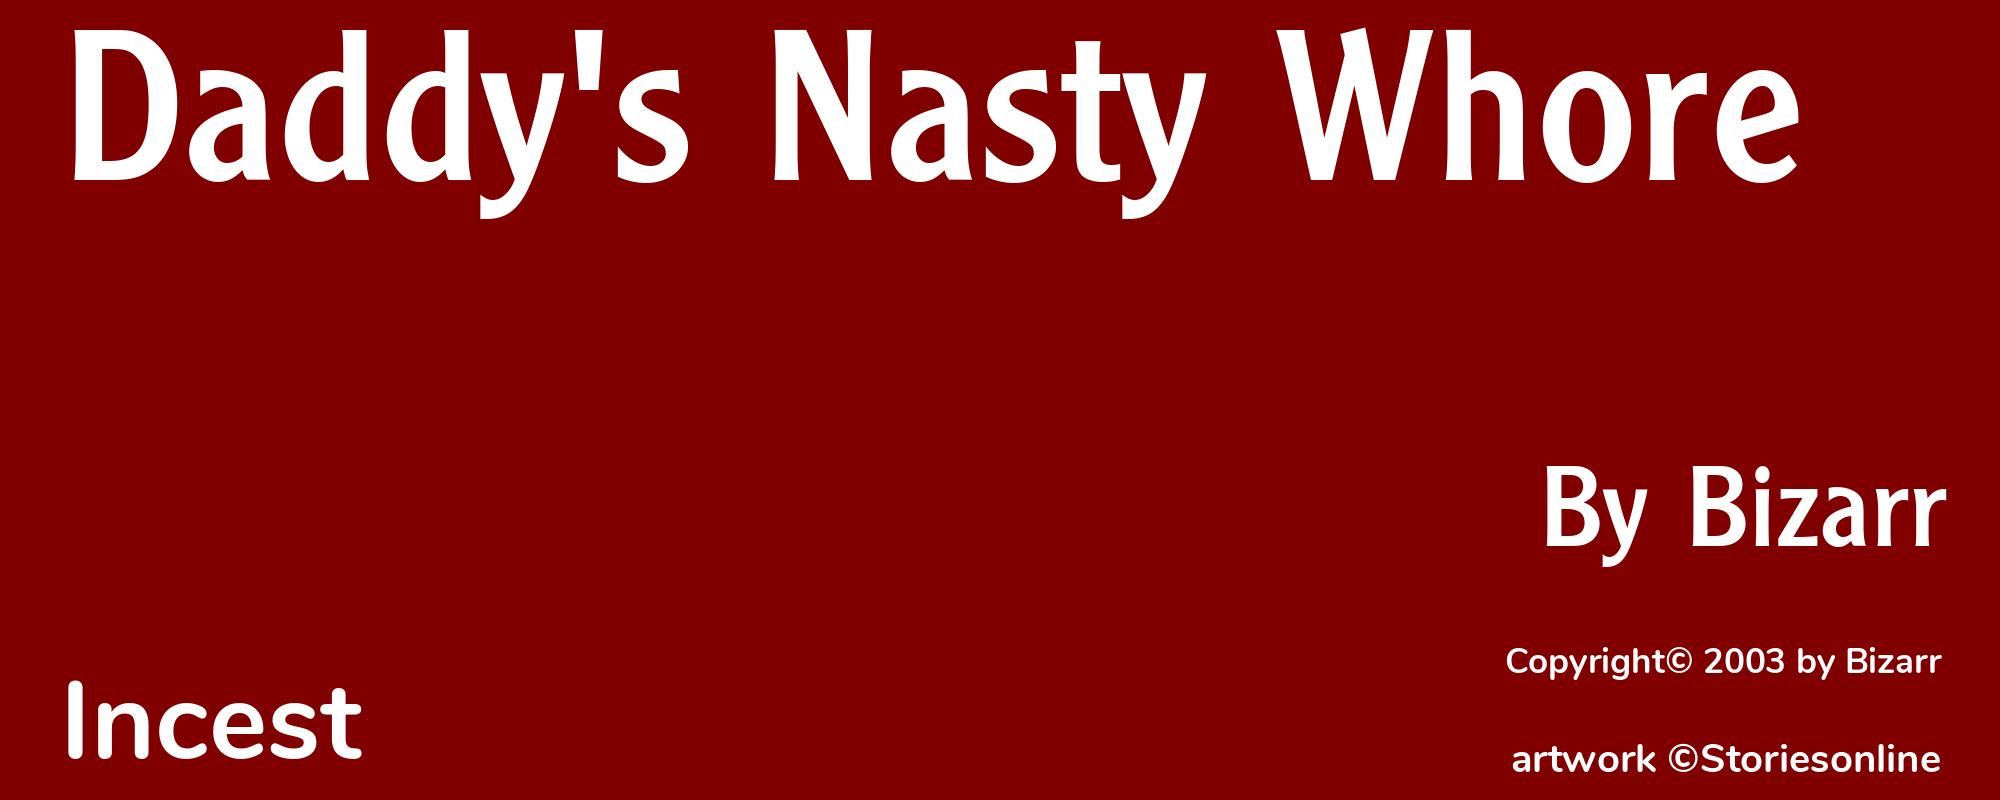 Daddy's Nasty Whore - Cover